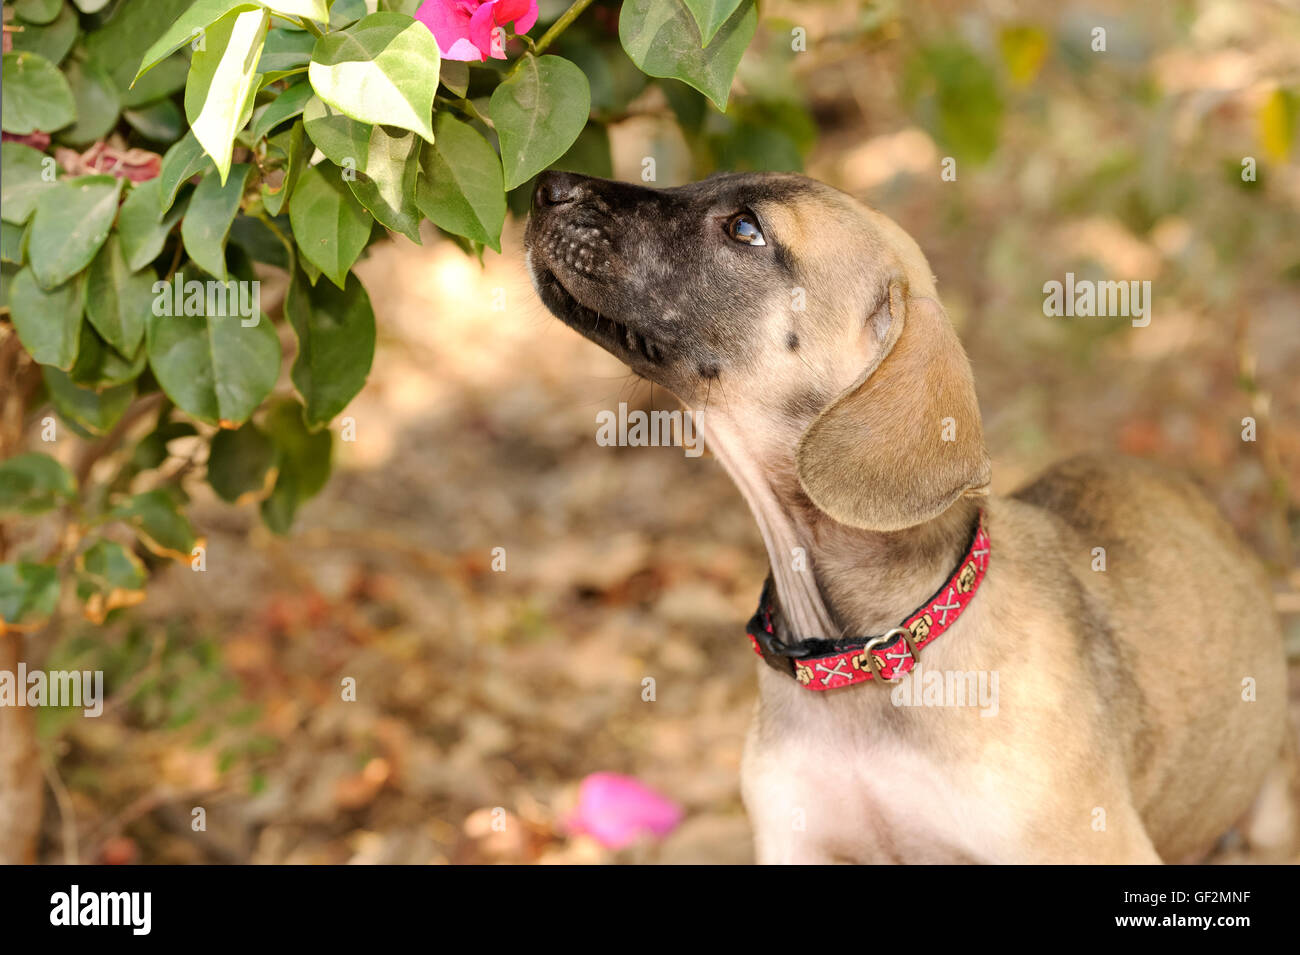 Dog sniffing is a cute dog smelling a small flowered filled tree. Stock Photo